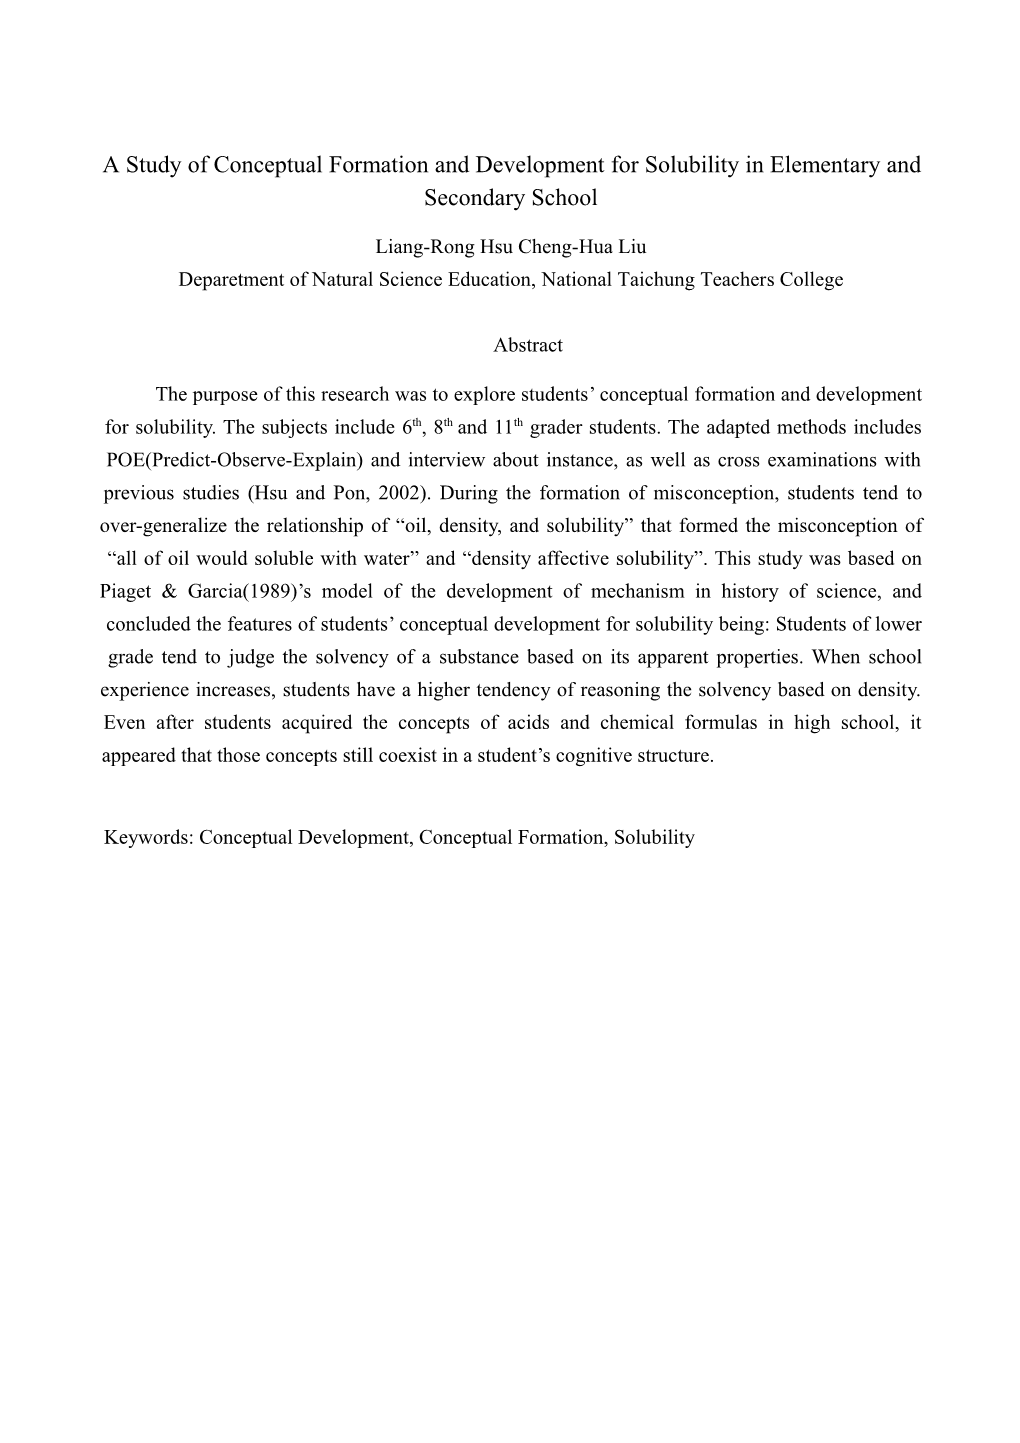 A Study of Conceptual Formation and Development for Solubility in Elementary and Secondary